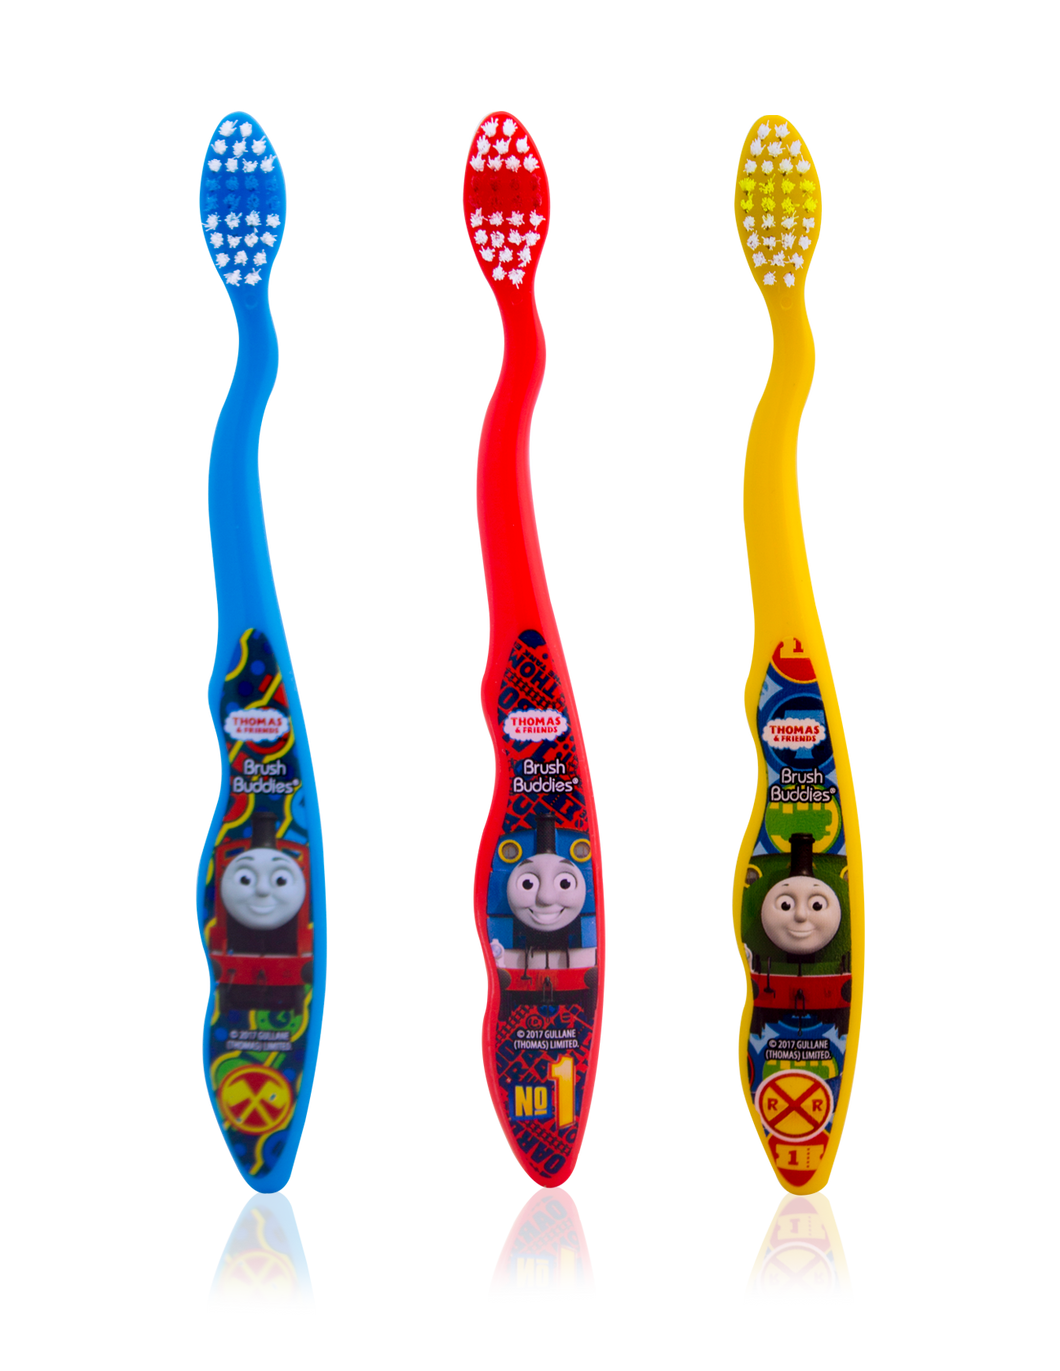 Thomas & Friends Toothbrush (3 Pack)